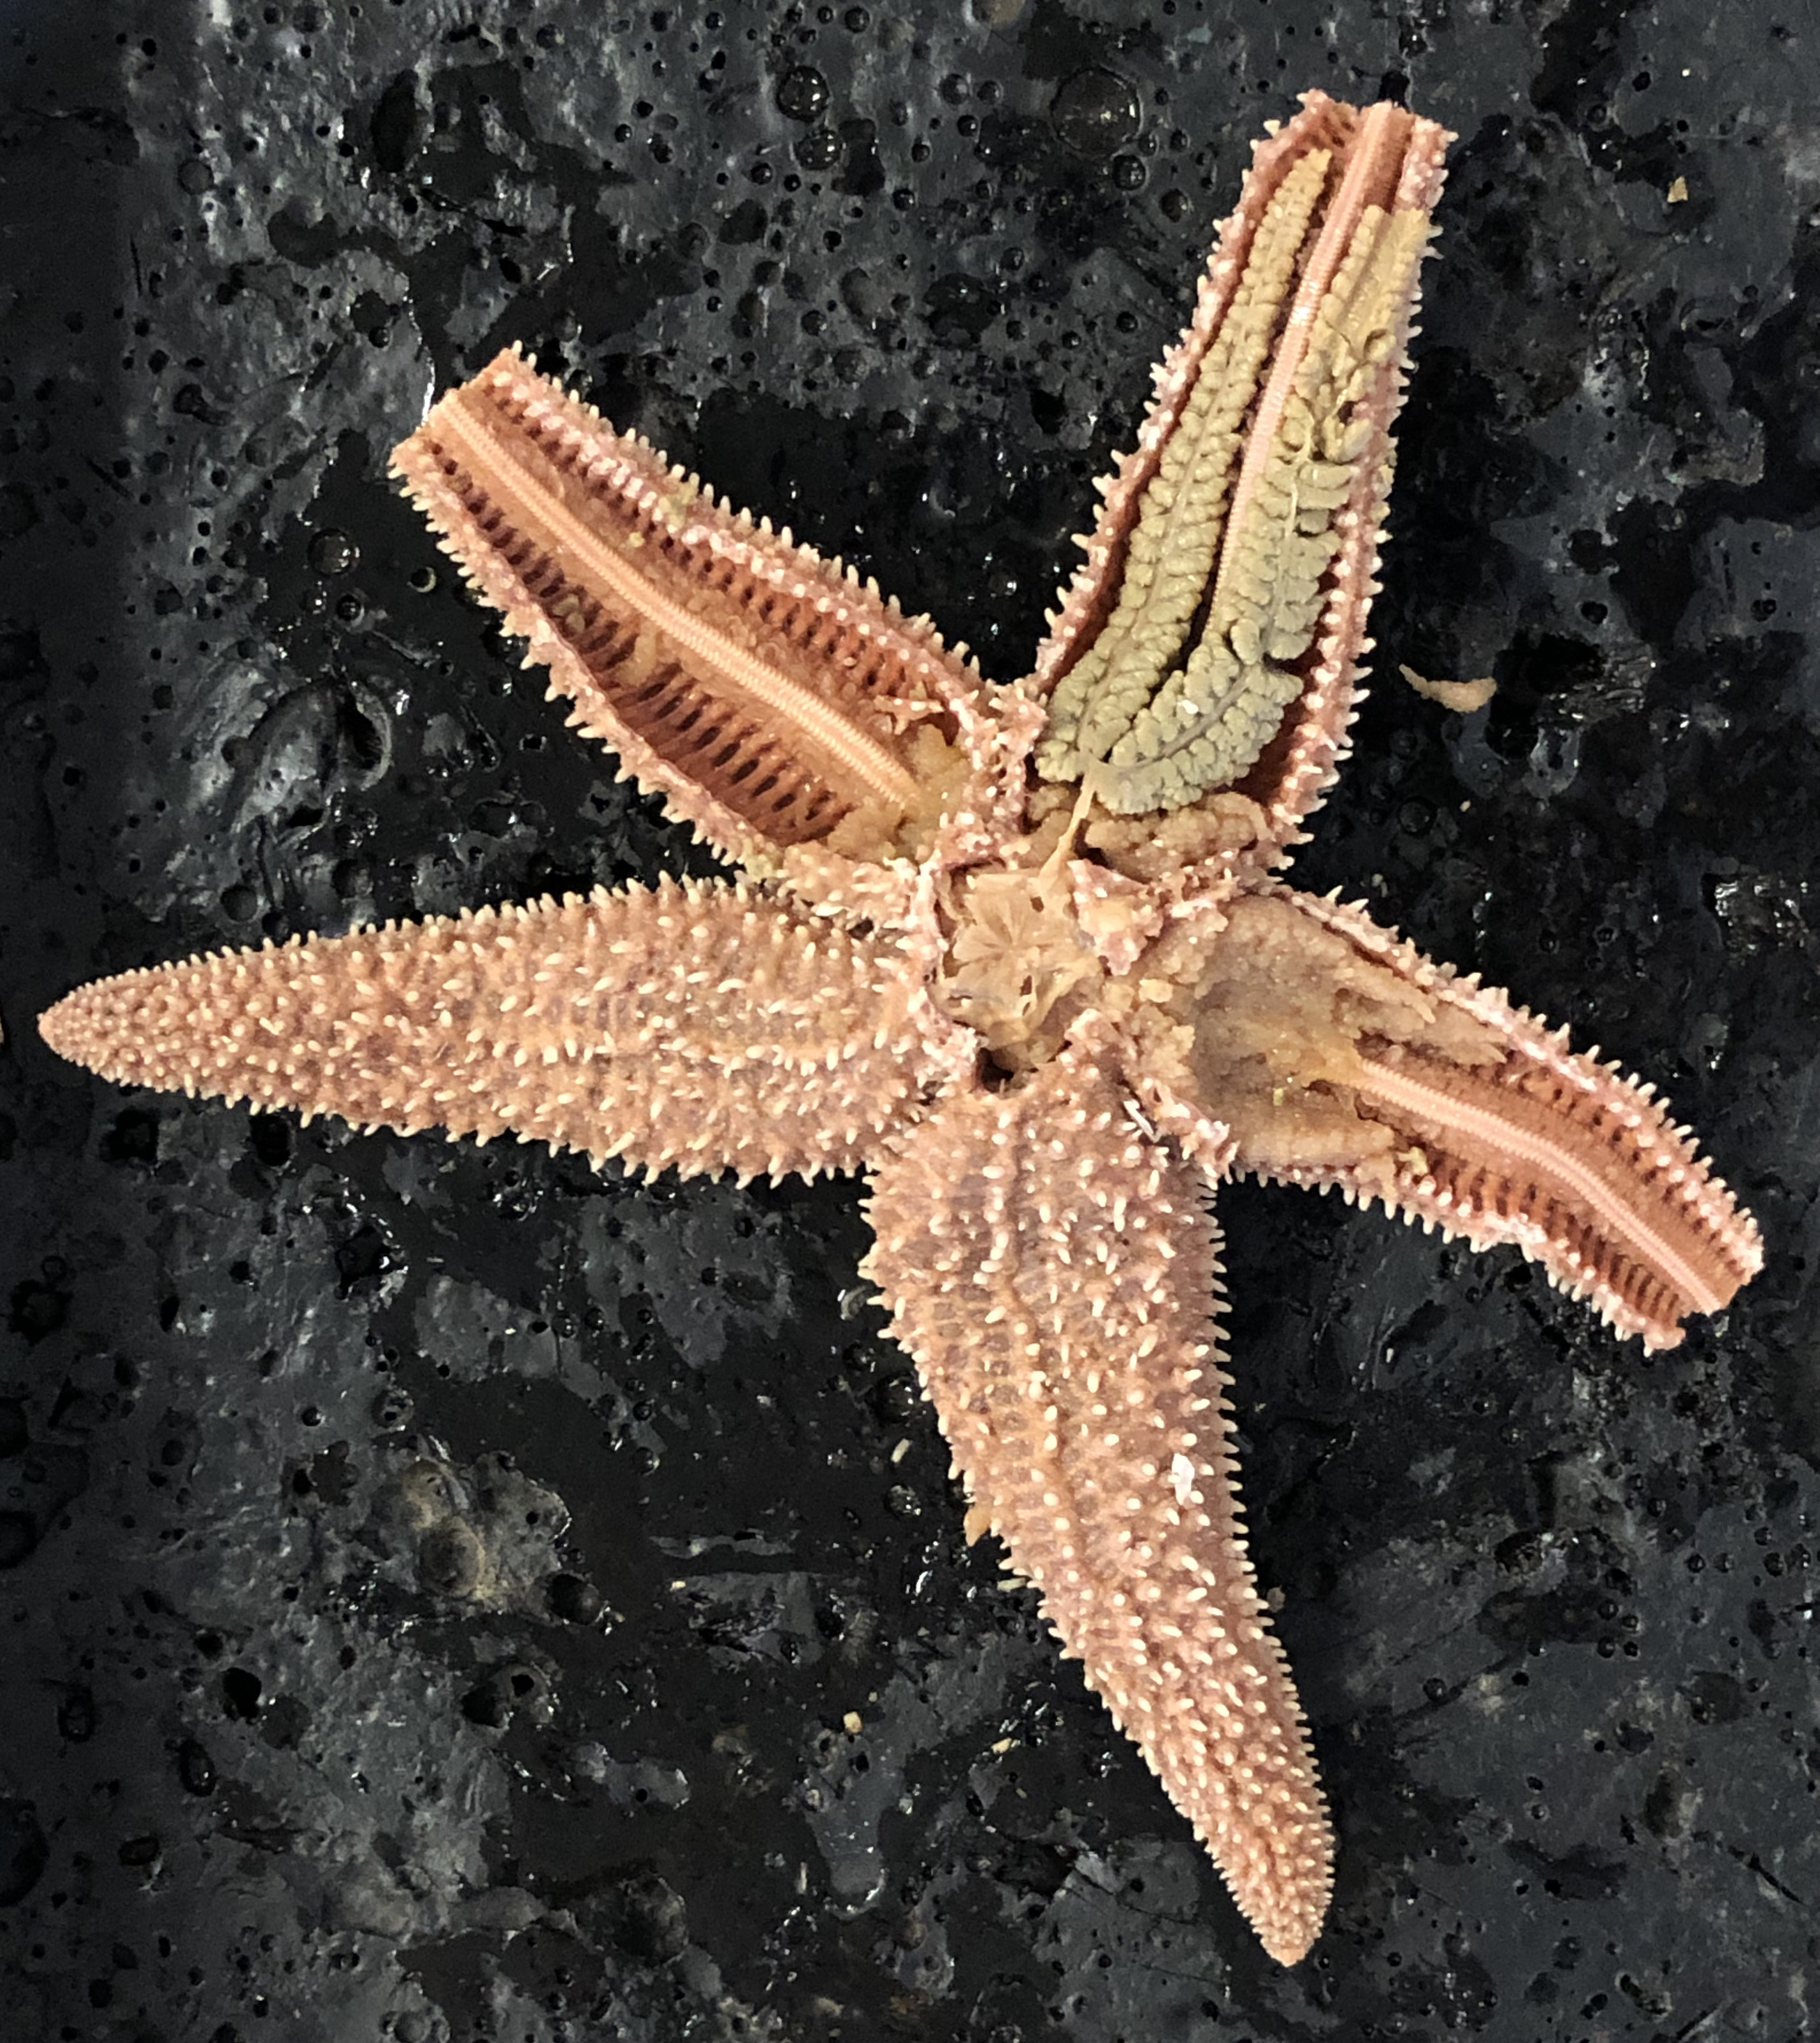 Starfish with exposed pyloric cecae, gonads and ambulacral ridge.